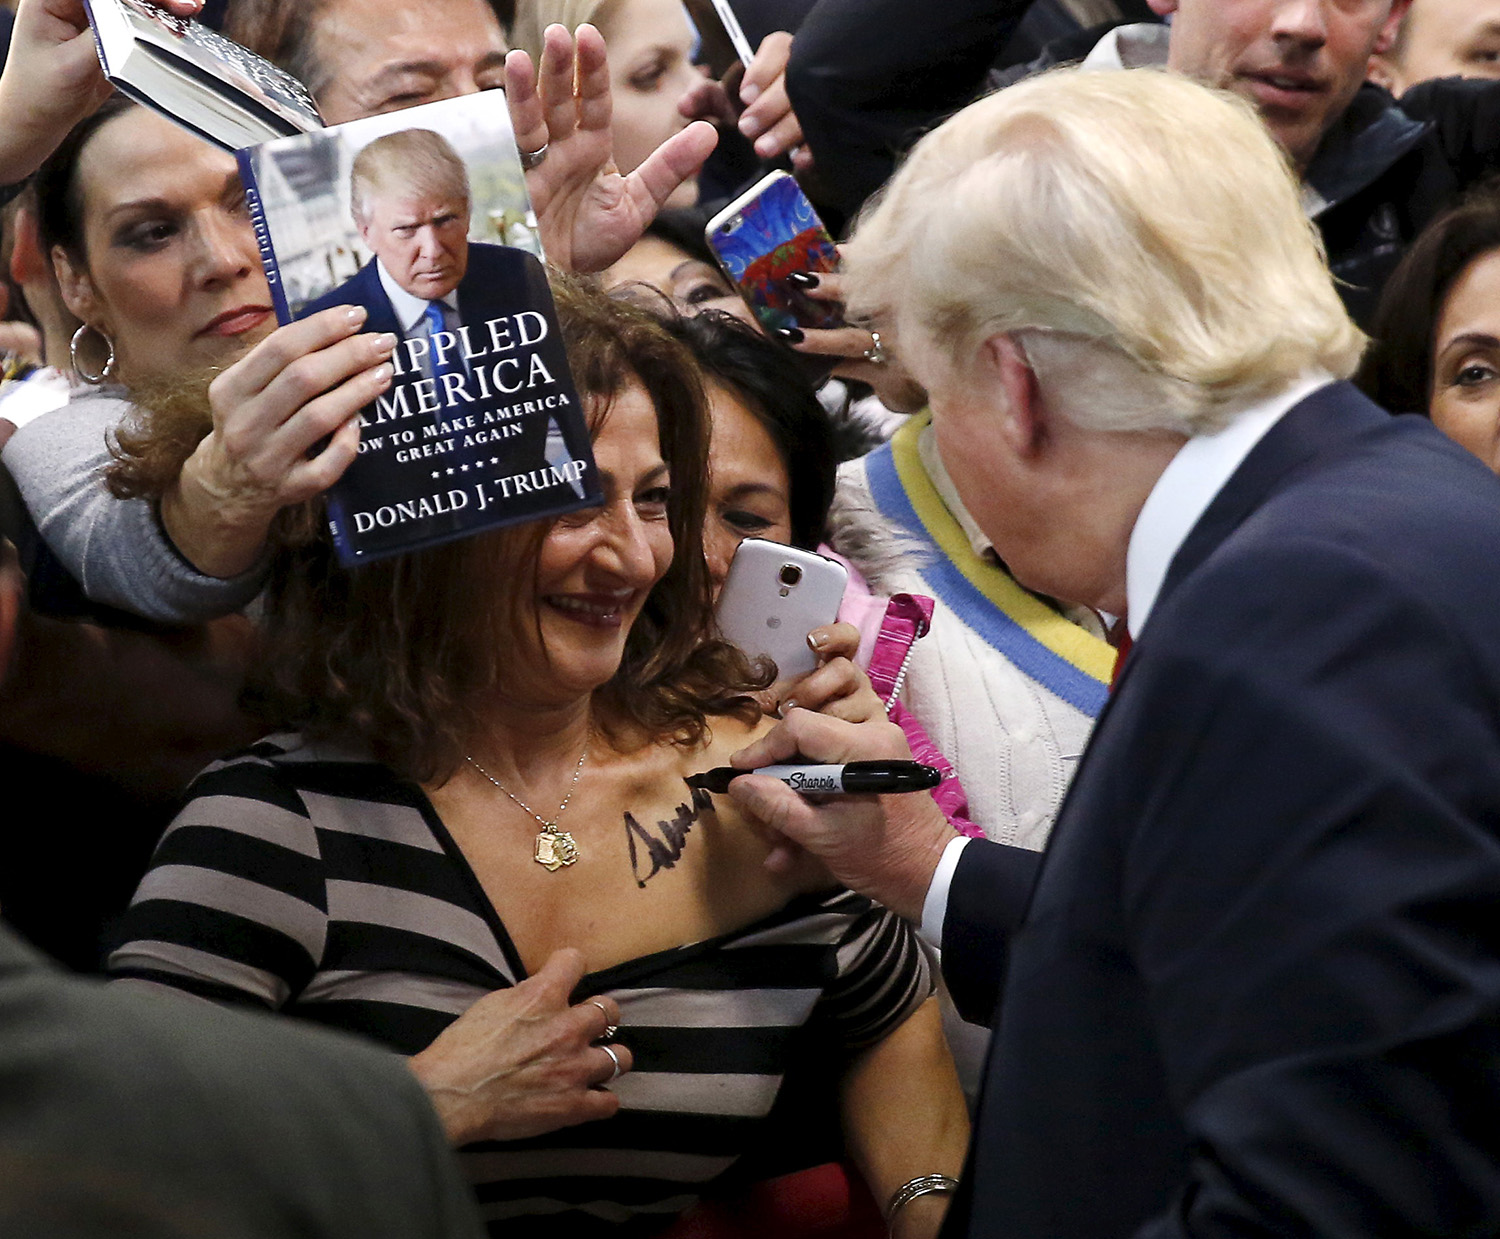 Republican presidential candidate Trump autographs chest of woman at his campaign rally in Manassas, Virginia